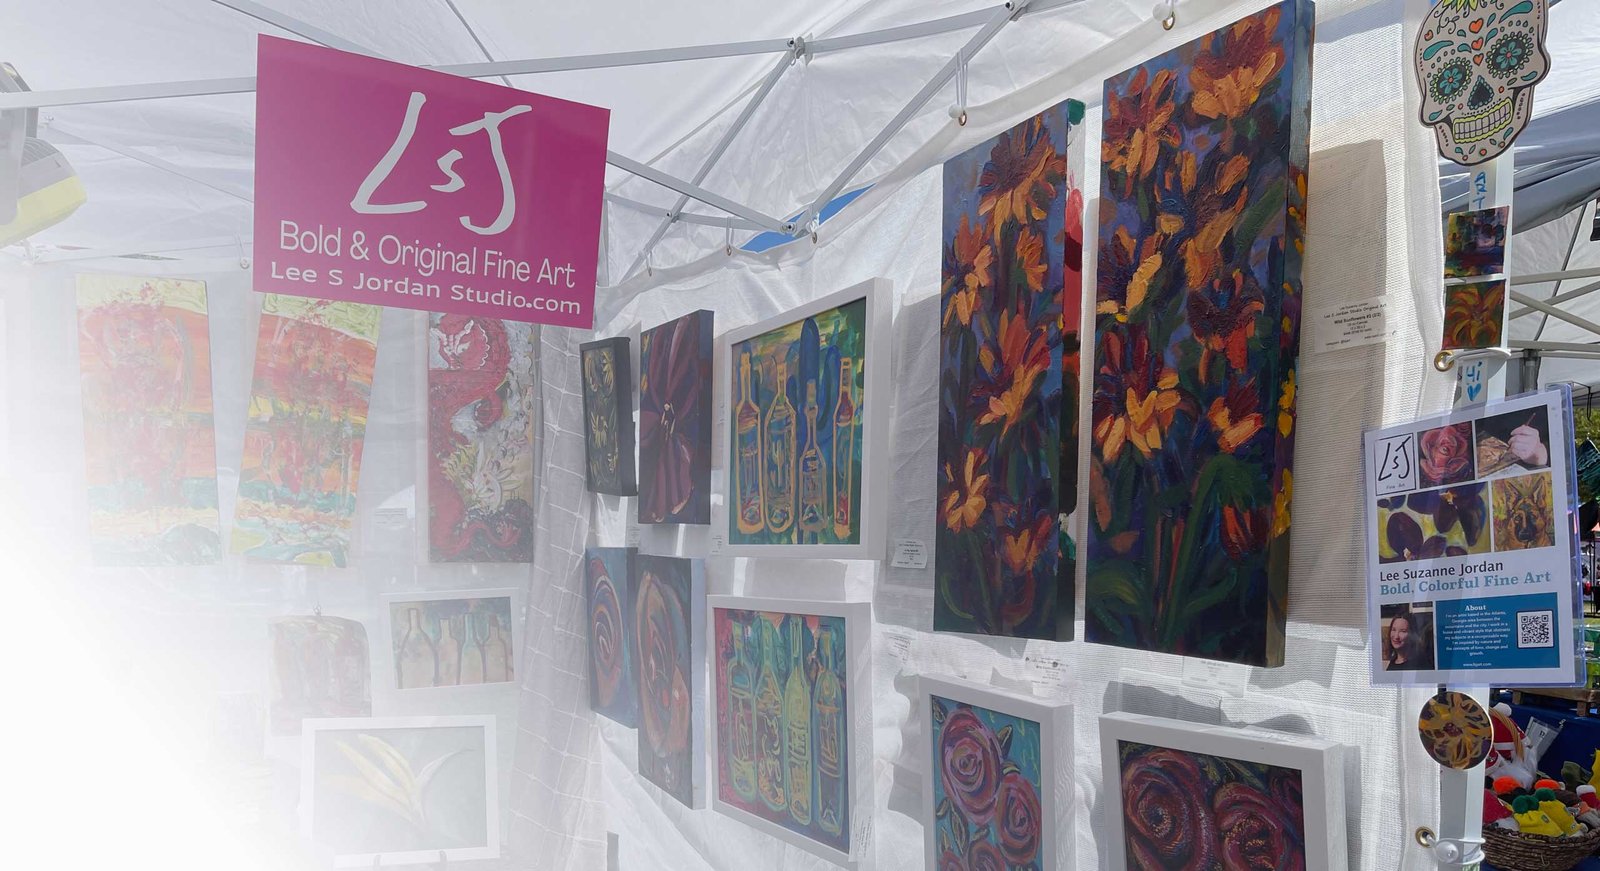 art show booth showing paintings hanging inside a pop up canopy tent